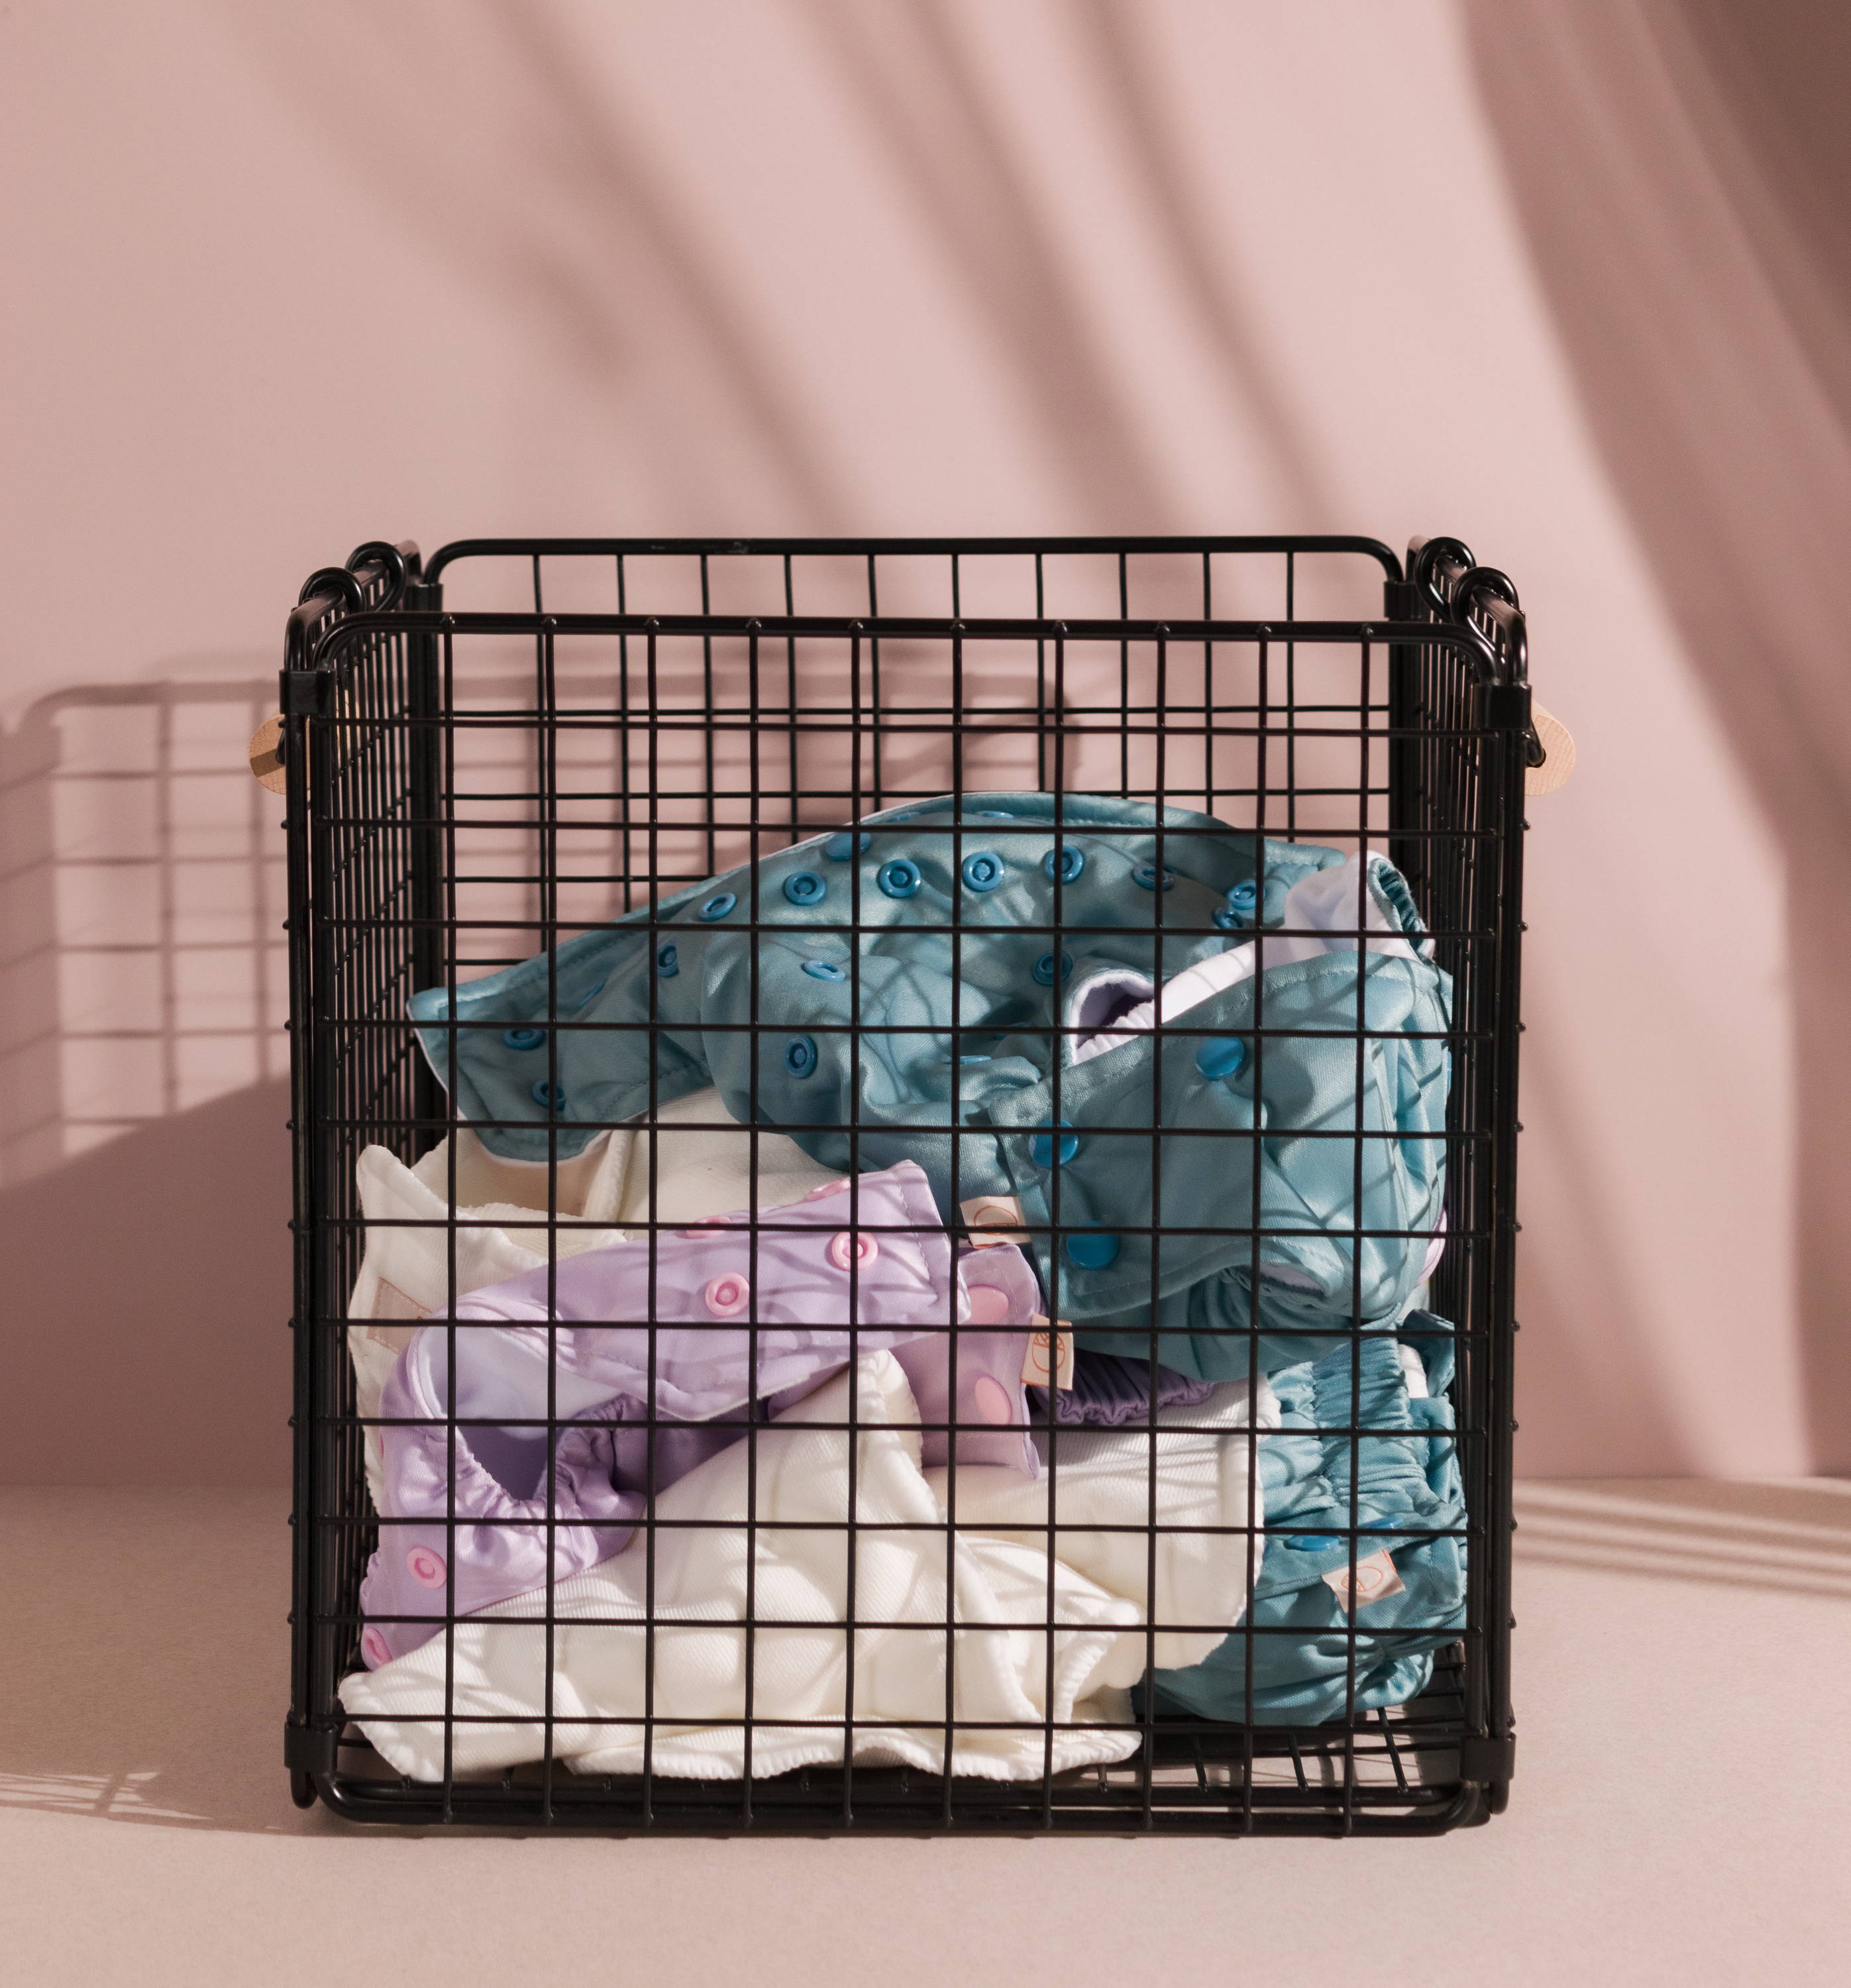 Sassy by Nestling Cloth Nappies in a wash basket